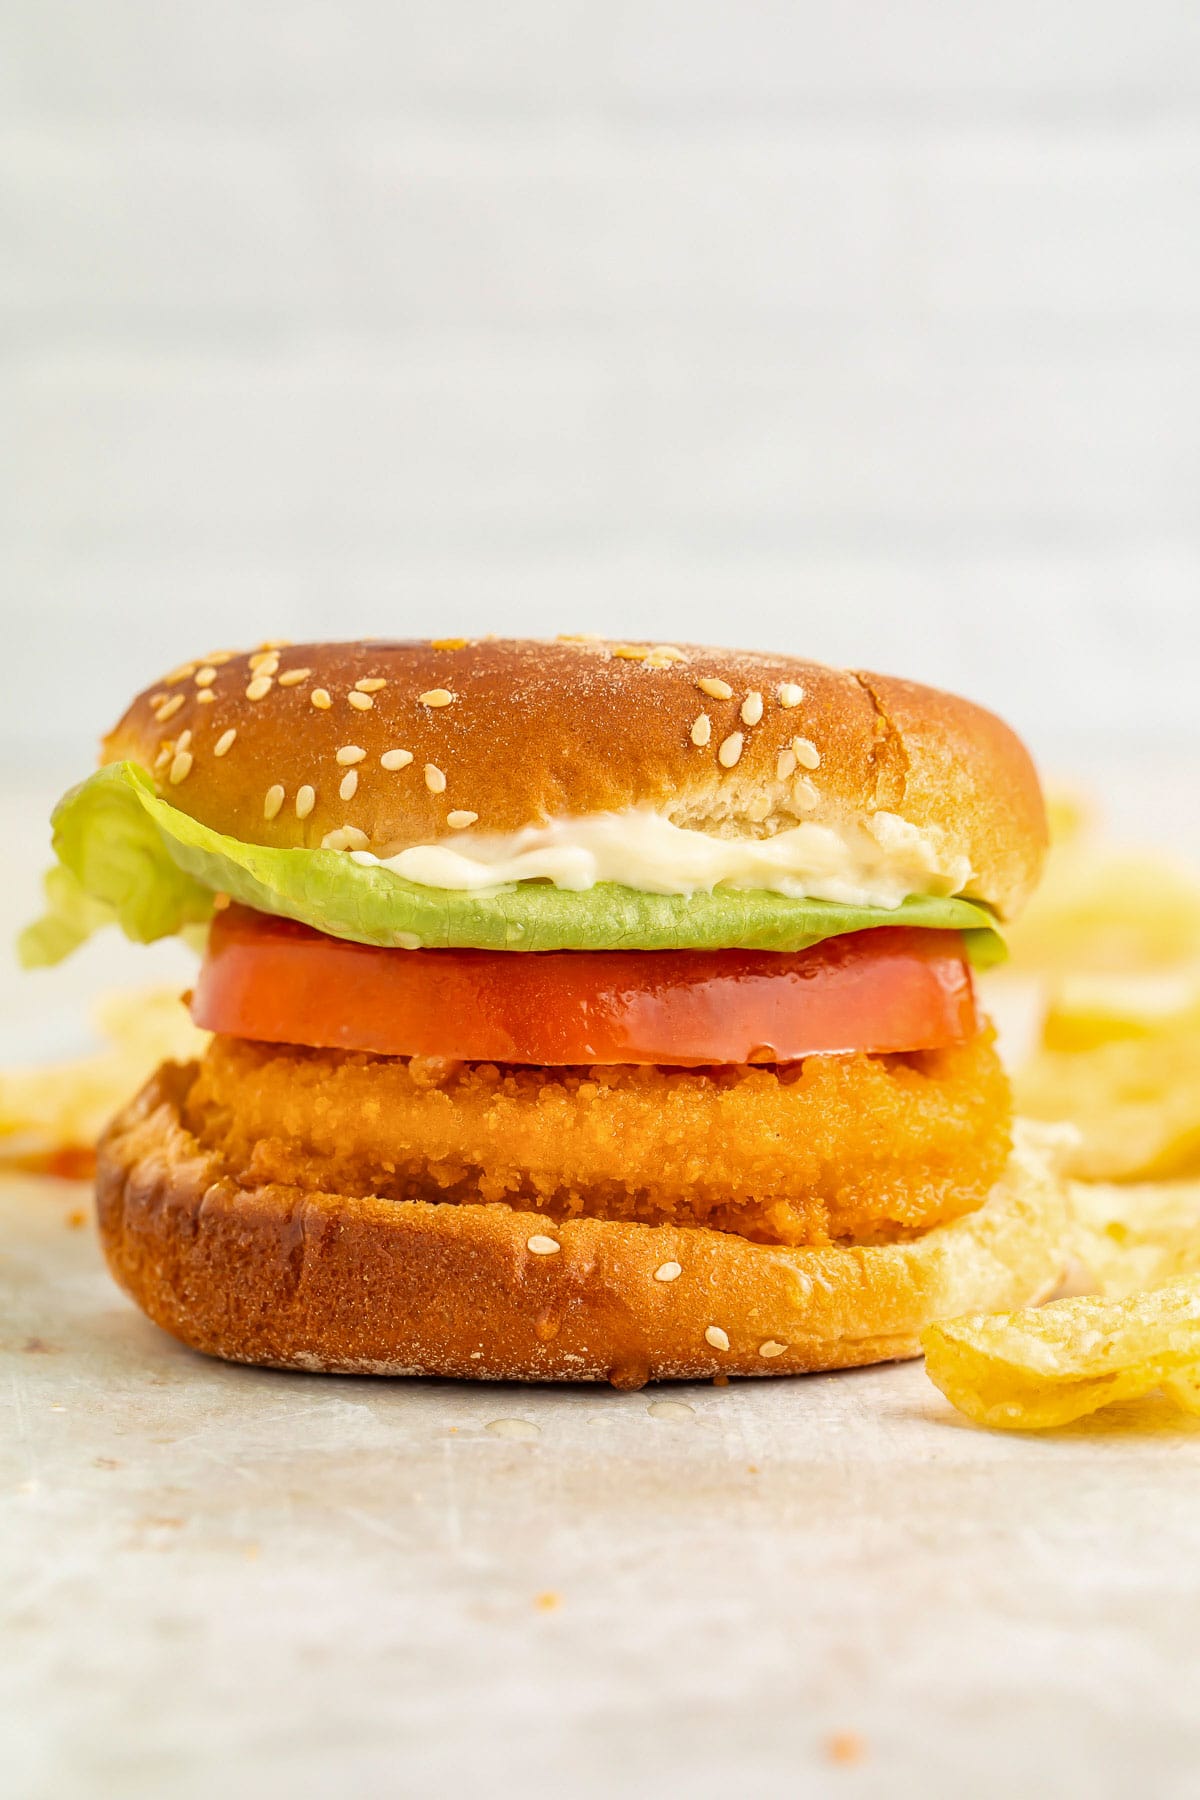 Air fryer frozen chicken patty sandwiched between two bun halves with a thick slice of tomato and iceberg lettuce.